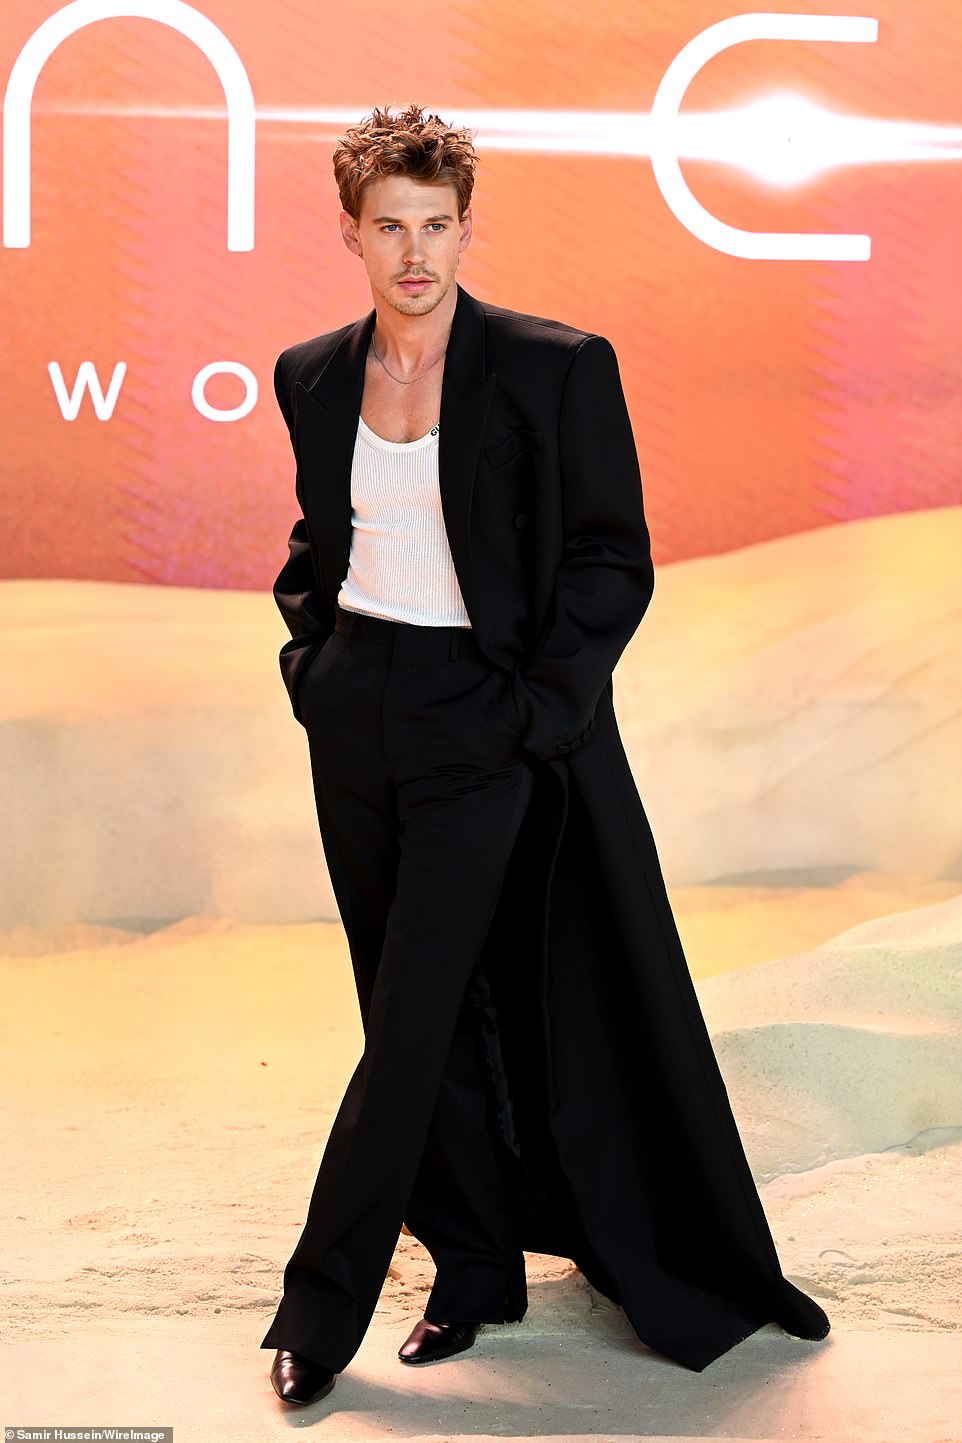 Austin Butler made a lively show when he arrived at the premiere wearing a black jacket with high-waisted pants and a white t-shirt.